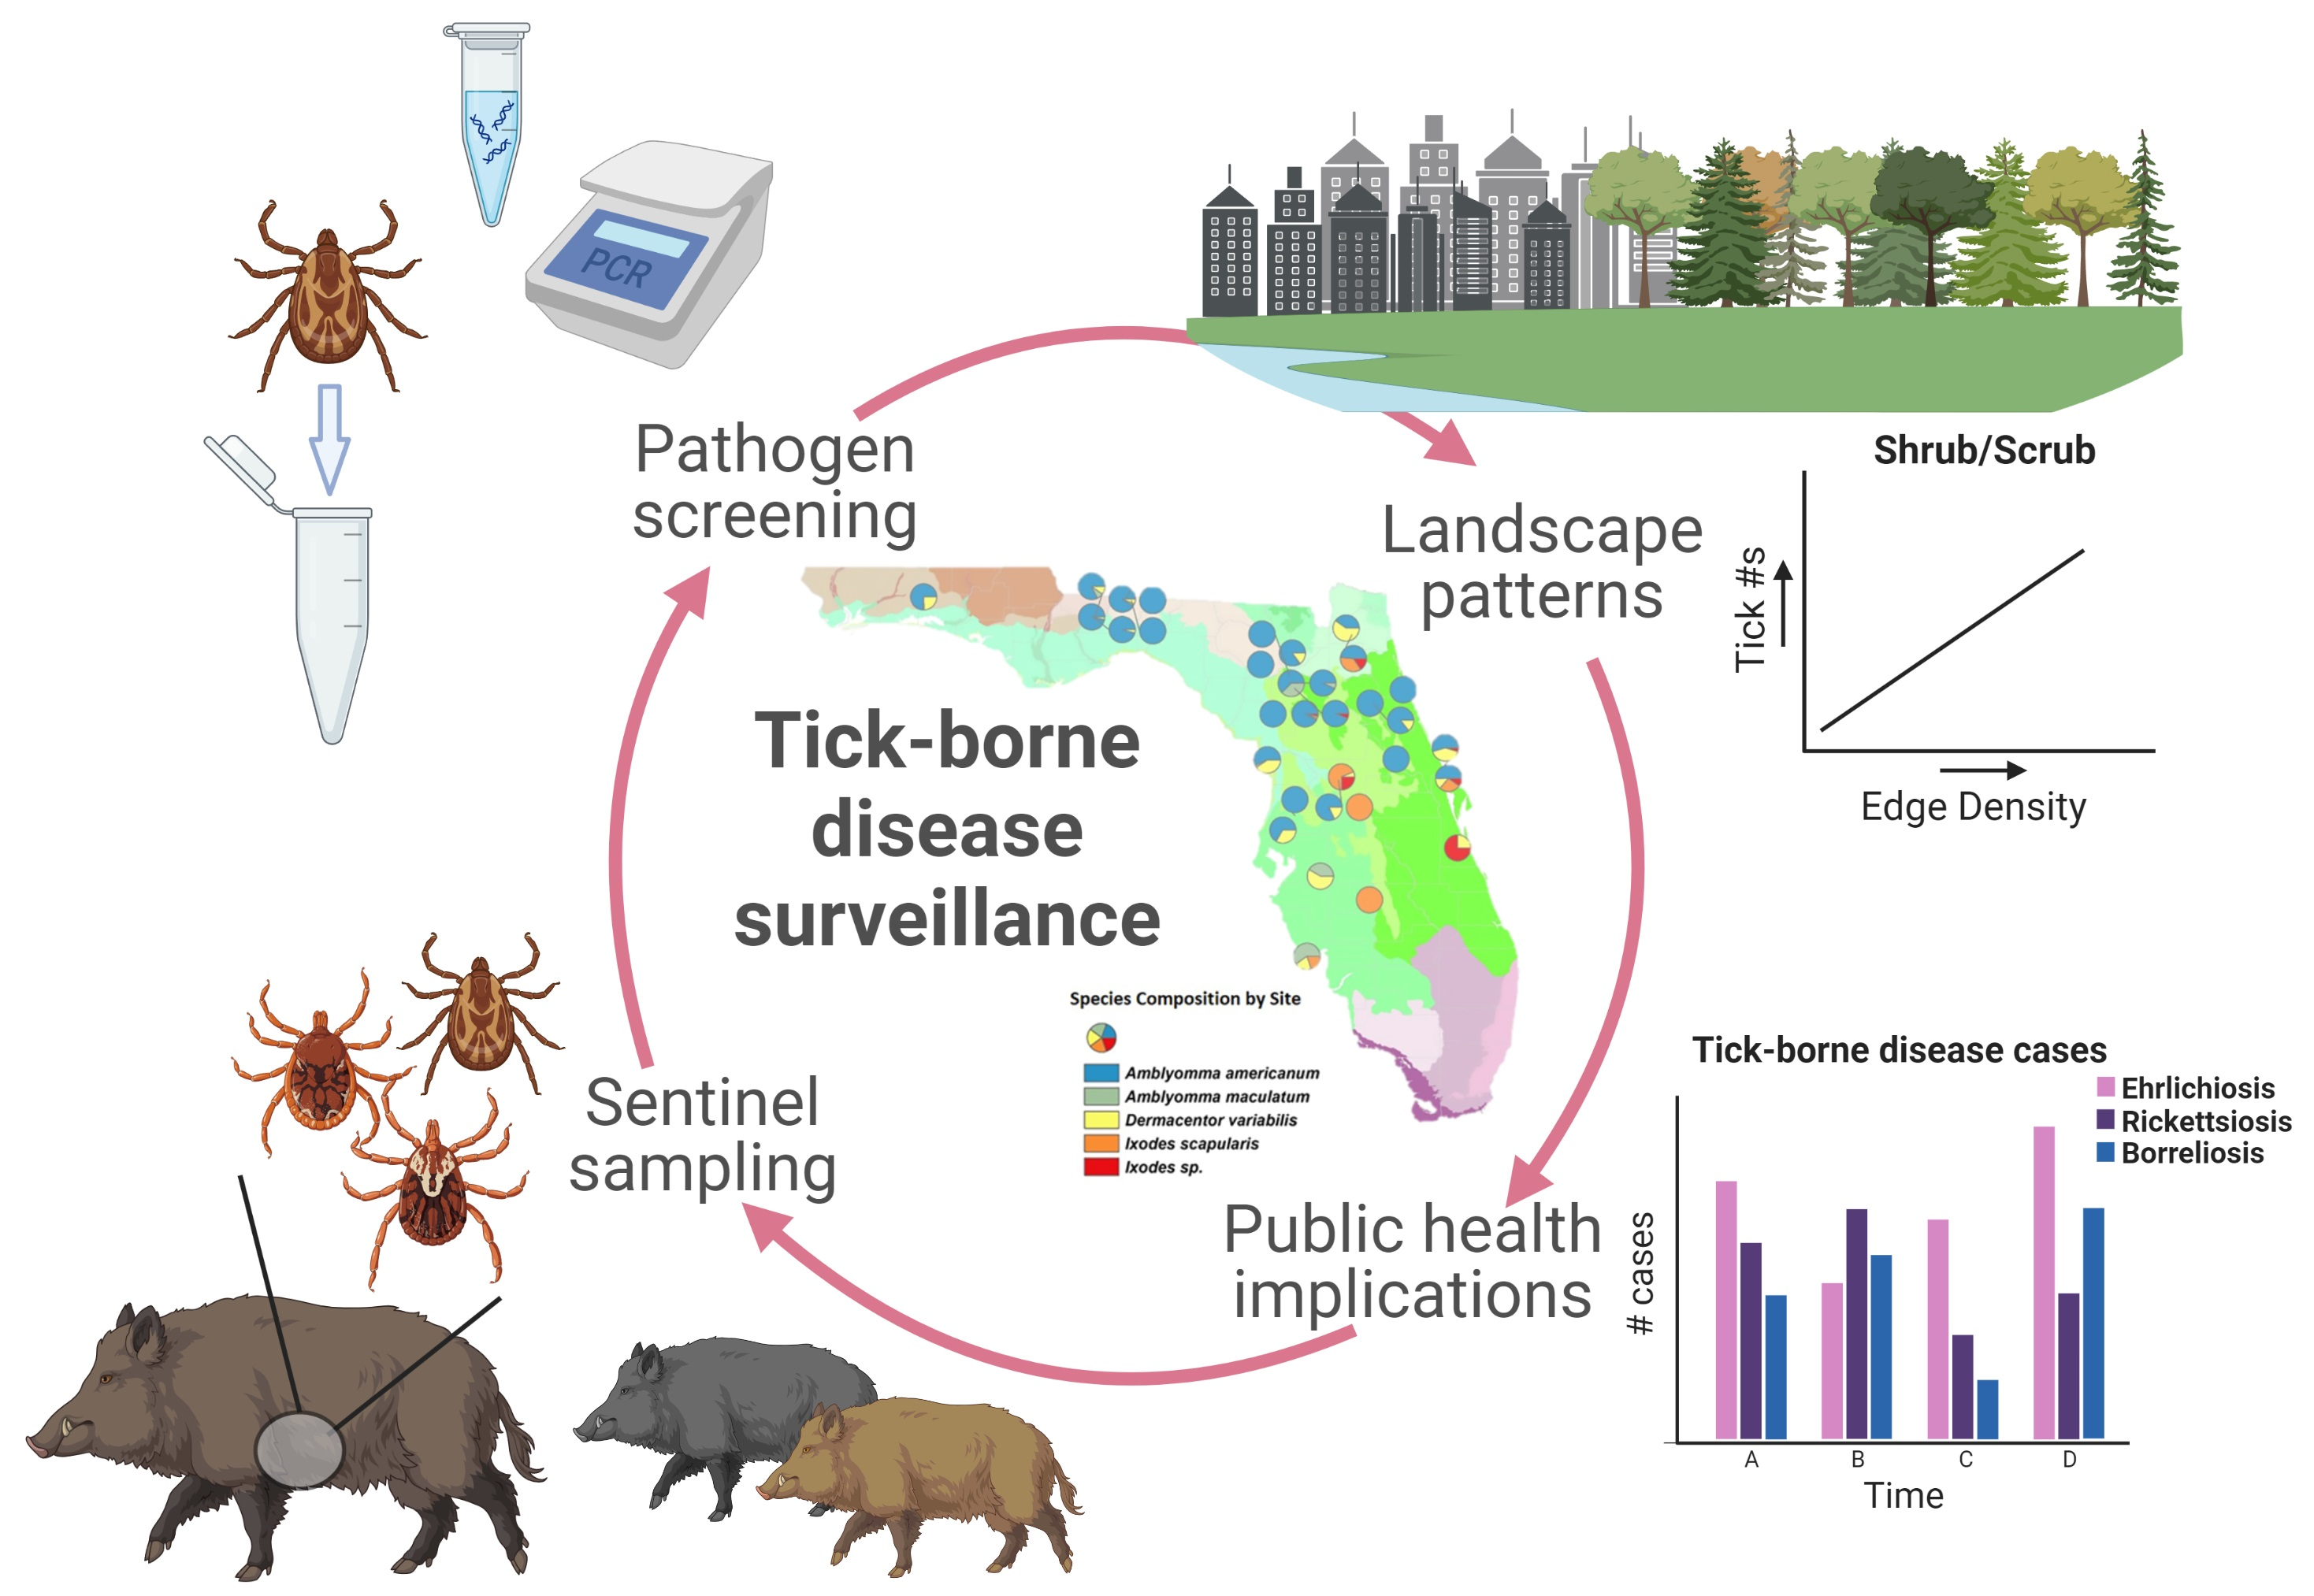 Voles, shrews and red squirrels as sources of tick blood meals and  tick-borne pathogens on an island in southwestern Finland - ScienceDirect